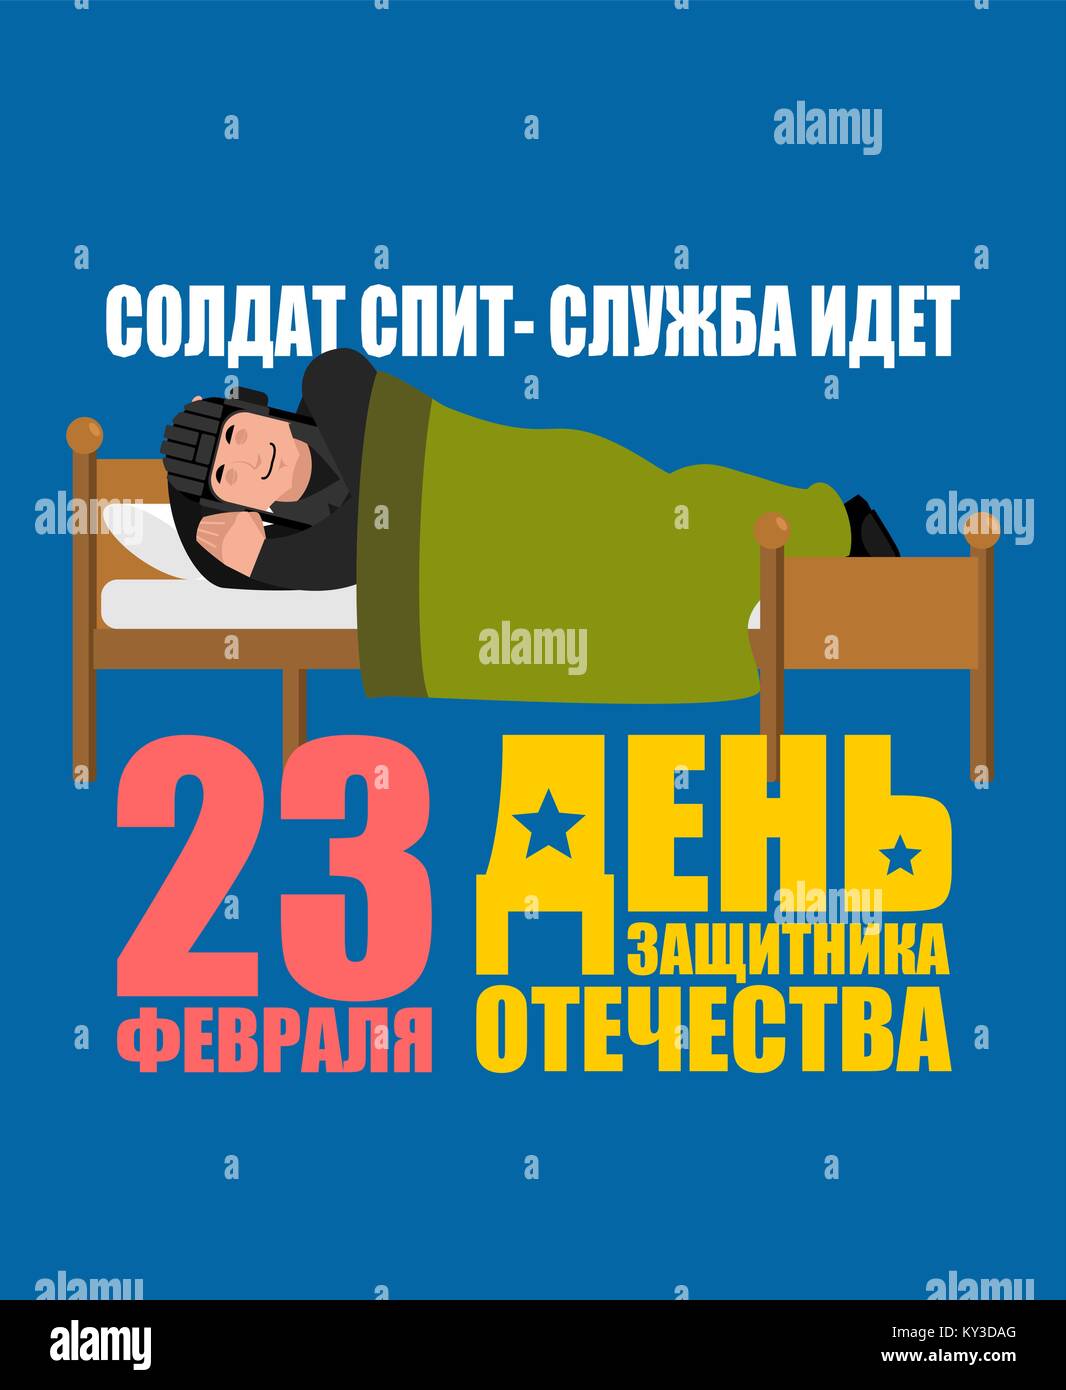 23 February. Defender of Fatherland Day. Tankman Sleeping on bed. Russian soldier asleep emotion avatar. Tankman Military in Russia dormant. Translati Stock Vector